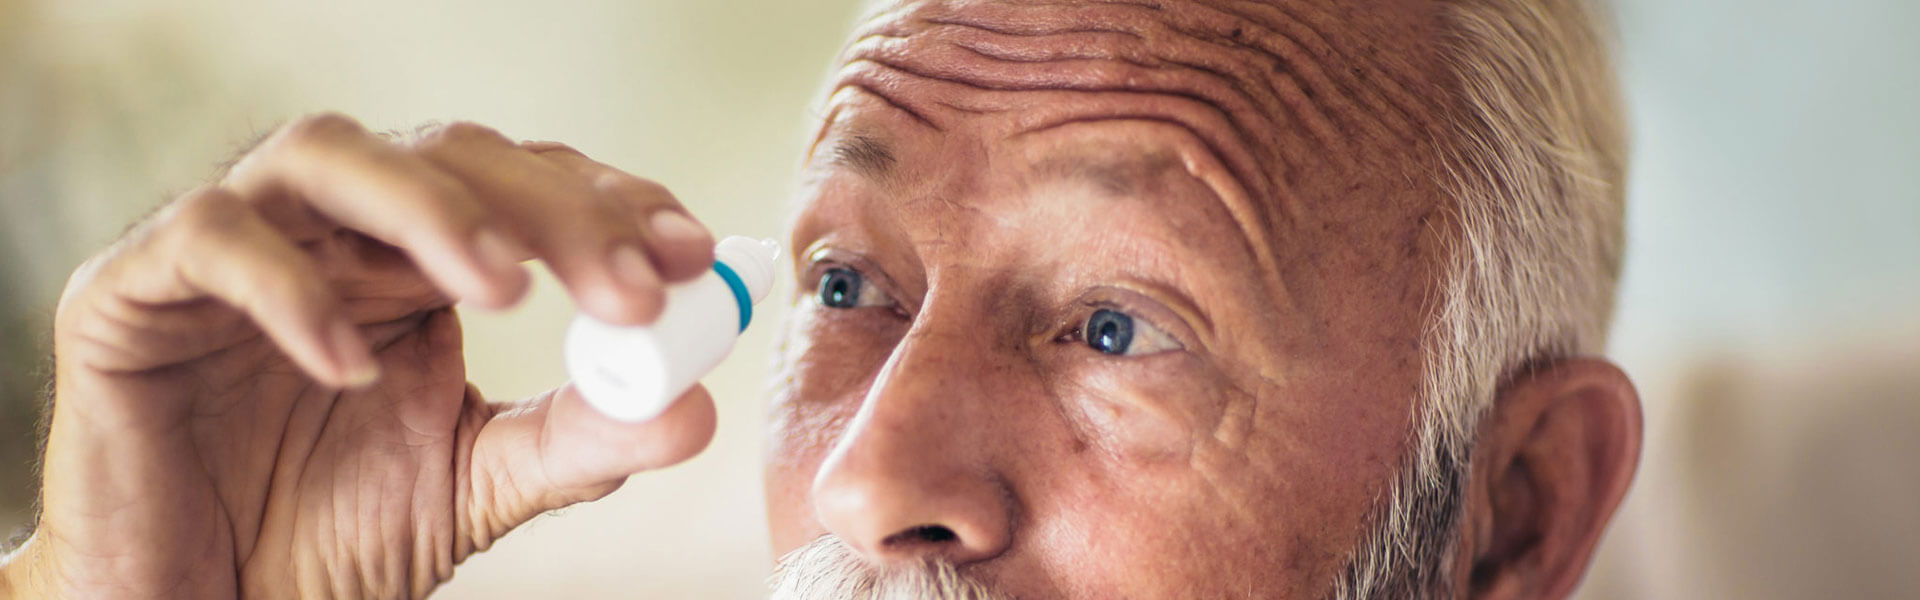 Are Your Eye Drops OK to Use with Contact Lenses?